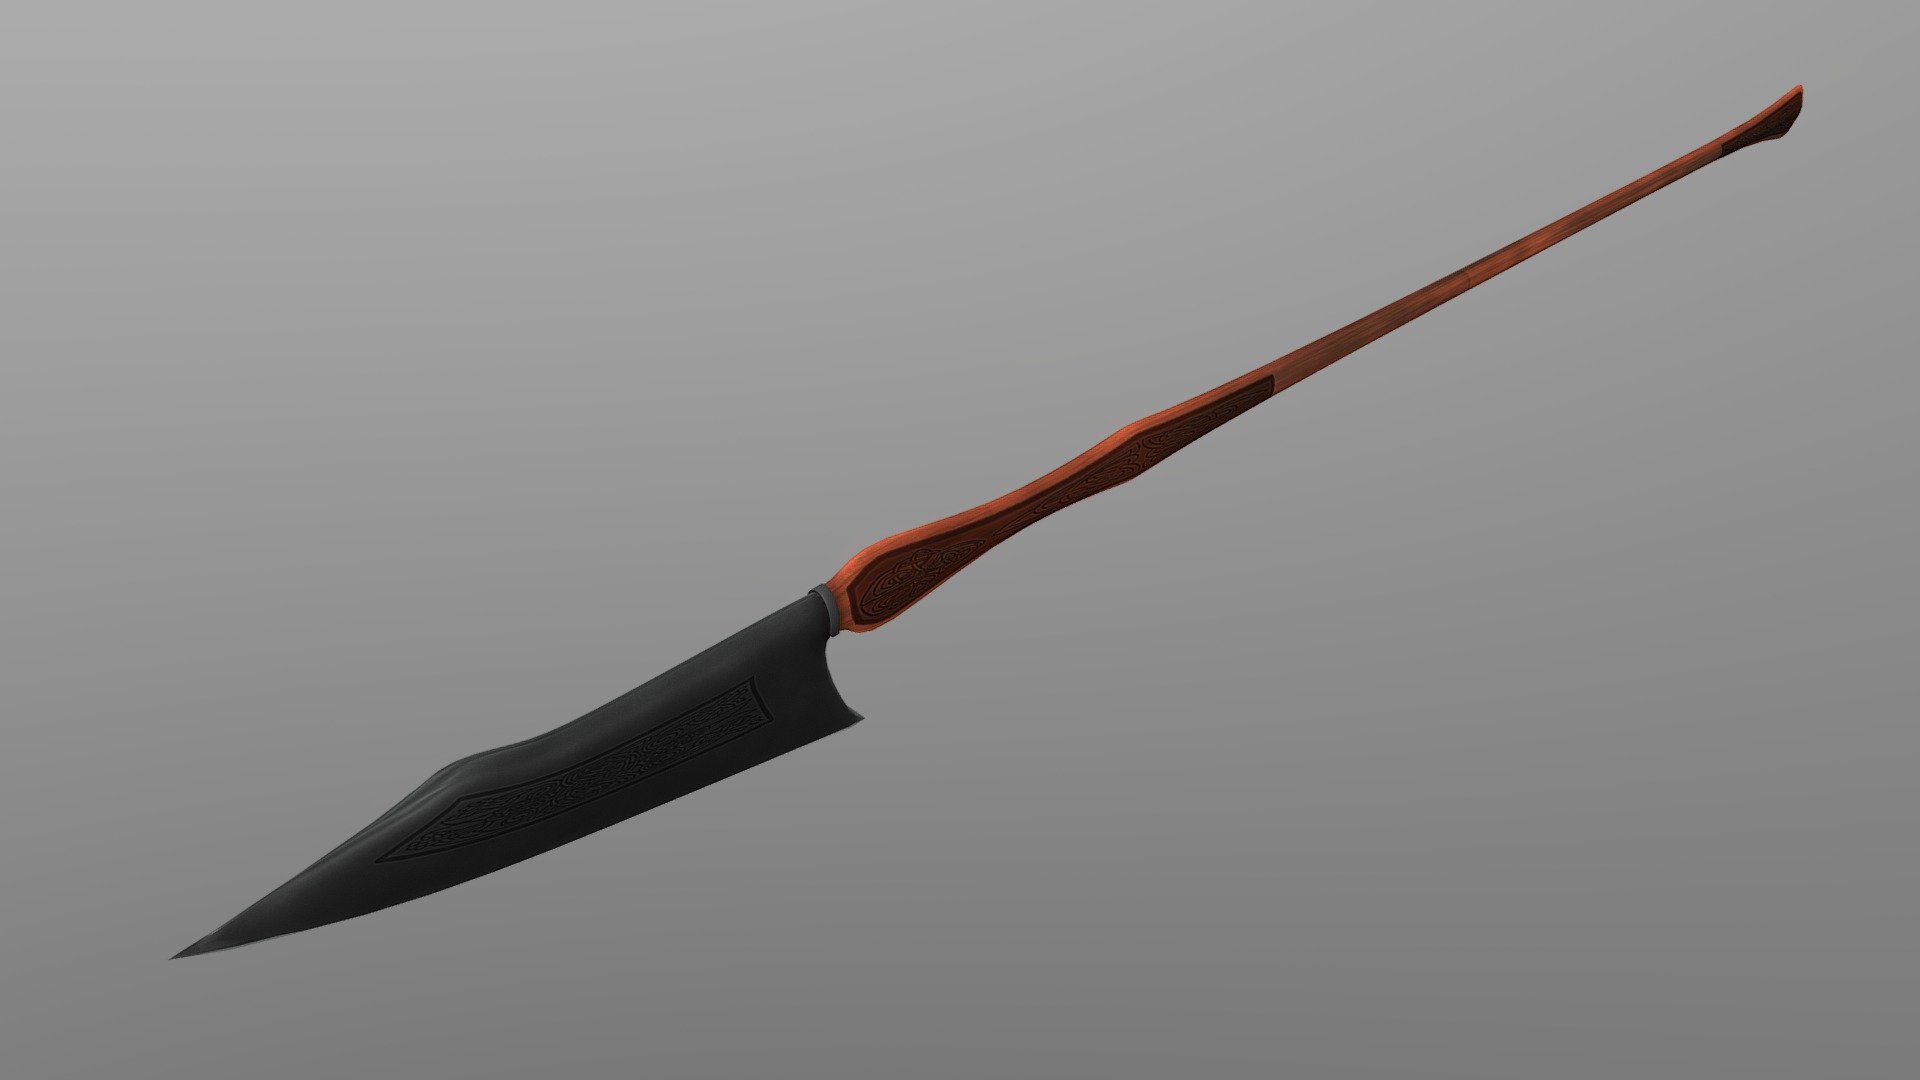 Woodland Spear
Bring your project to life with this low poly 3D model of an Woodland Spear. Perfect for use in games, animations, VR, AR, and more, this model is optimized for performance and still retains a high level of detail.


Features



Low poly design with 2,194 vertices

4,320 edges

2,128 faces (polygons)

4,256 tris

2k PBR Textures and materials

File formats included: .obj, .fbx, .dae


Tools Used
This Woodland Spear low poly 3D model was created using Blender 3.3.1, a popular and versatile 3D creation software.


Availability
This low poly Woodland Spear 3D model is ready for use and available for purchase. Bring your project to the next level with this high-quality and optimized model 3d model